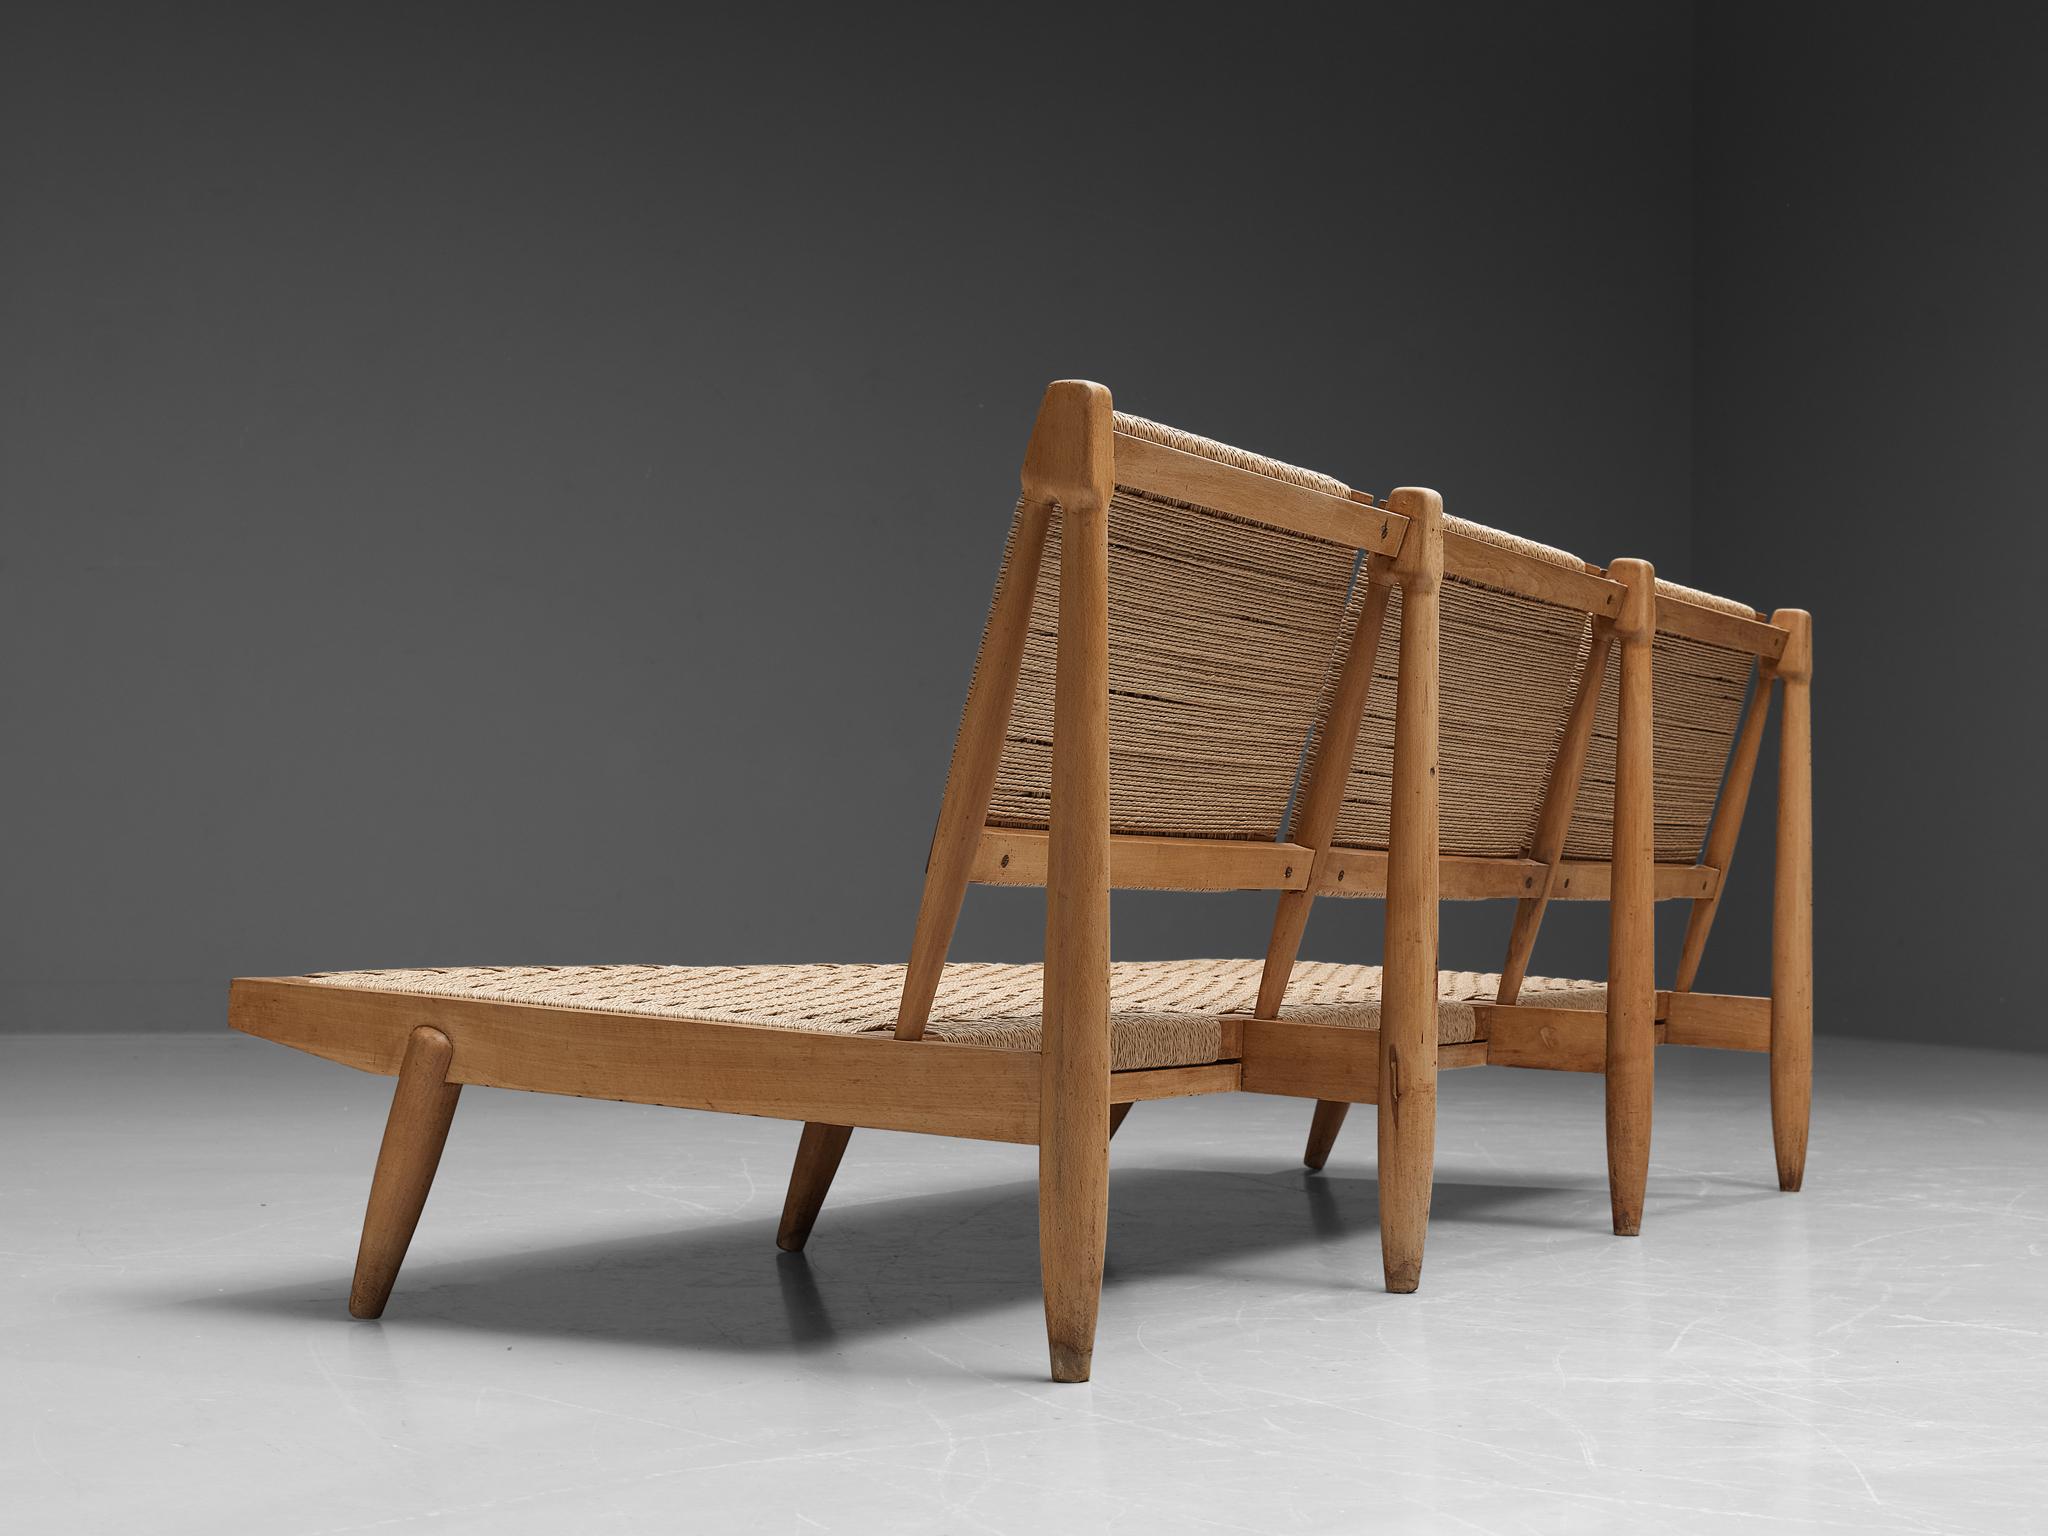 Spanish Bench in Wood and Straw 2